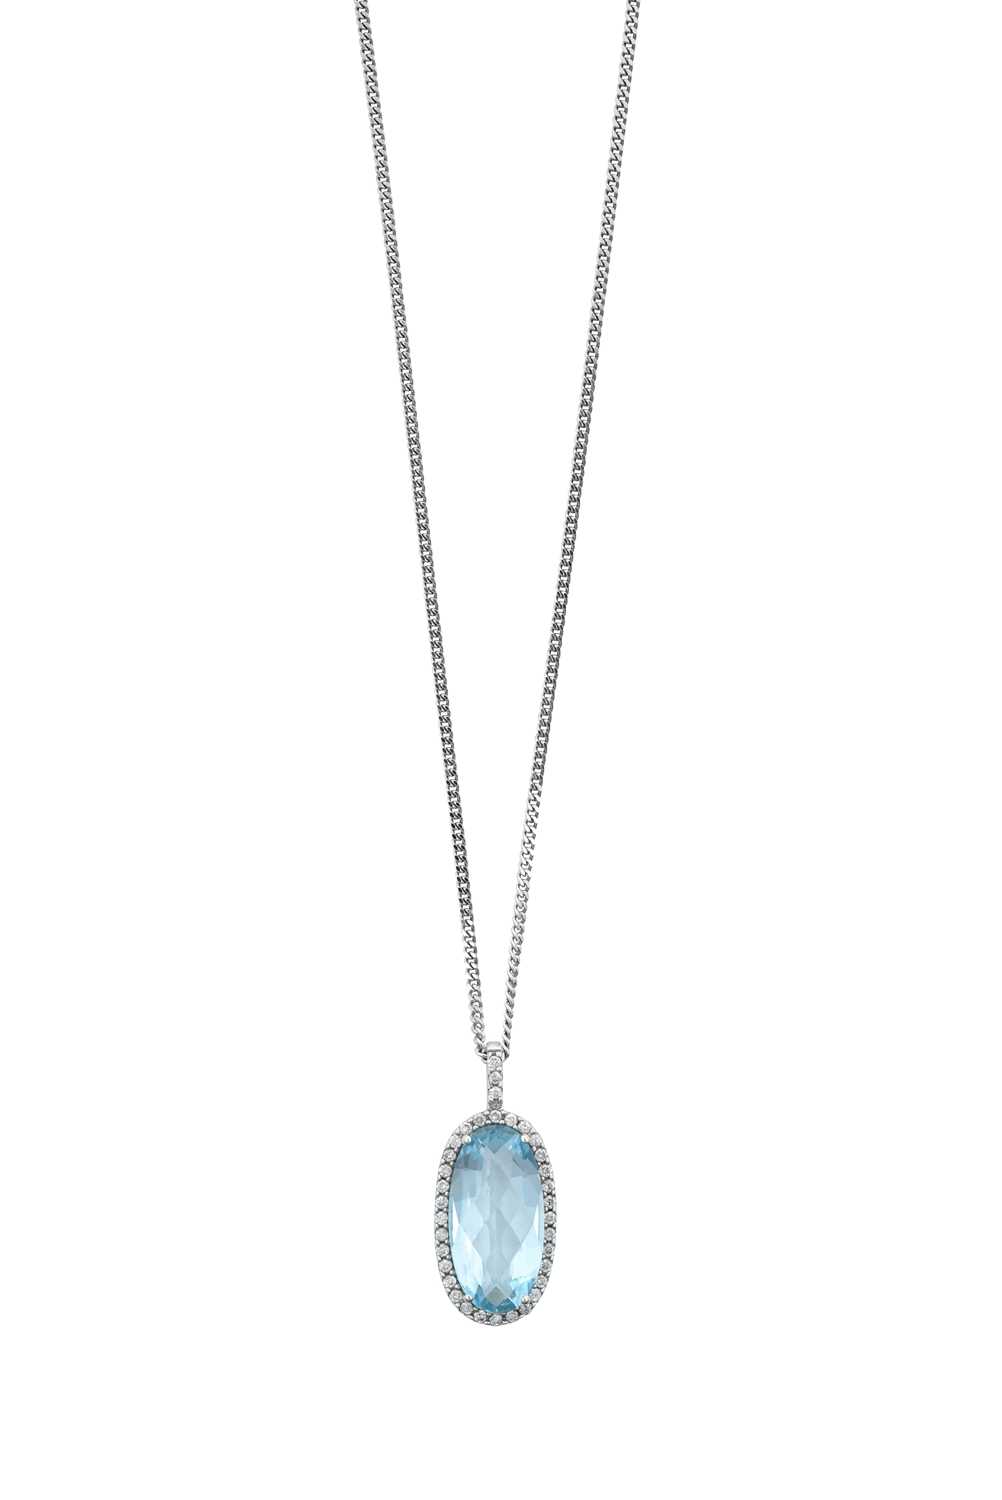 An 18 Carat White Gold Blue Topaz and Diamond Cluster Pendant on Chain the fancy oval cut blue topaz